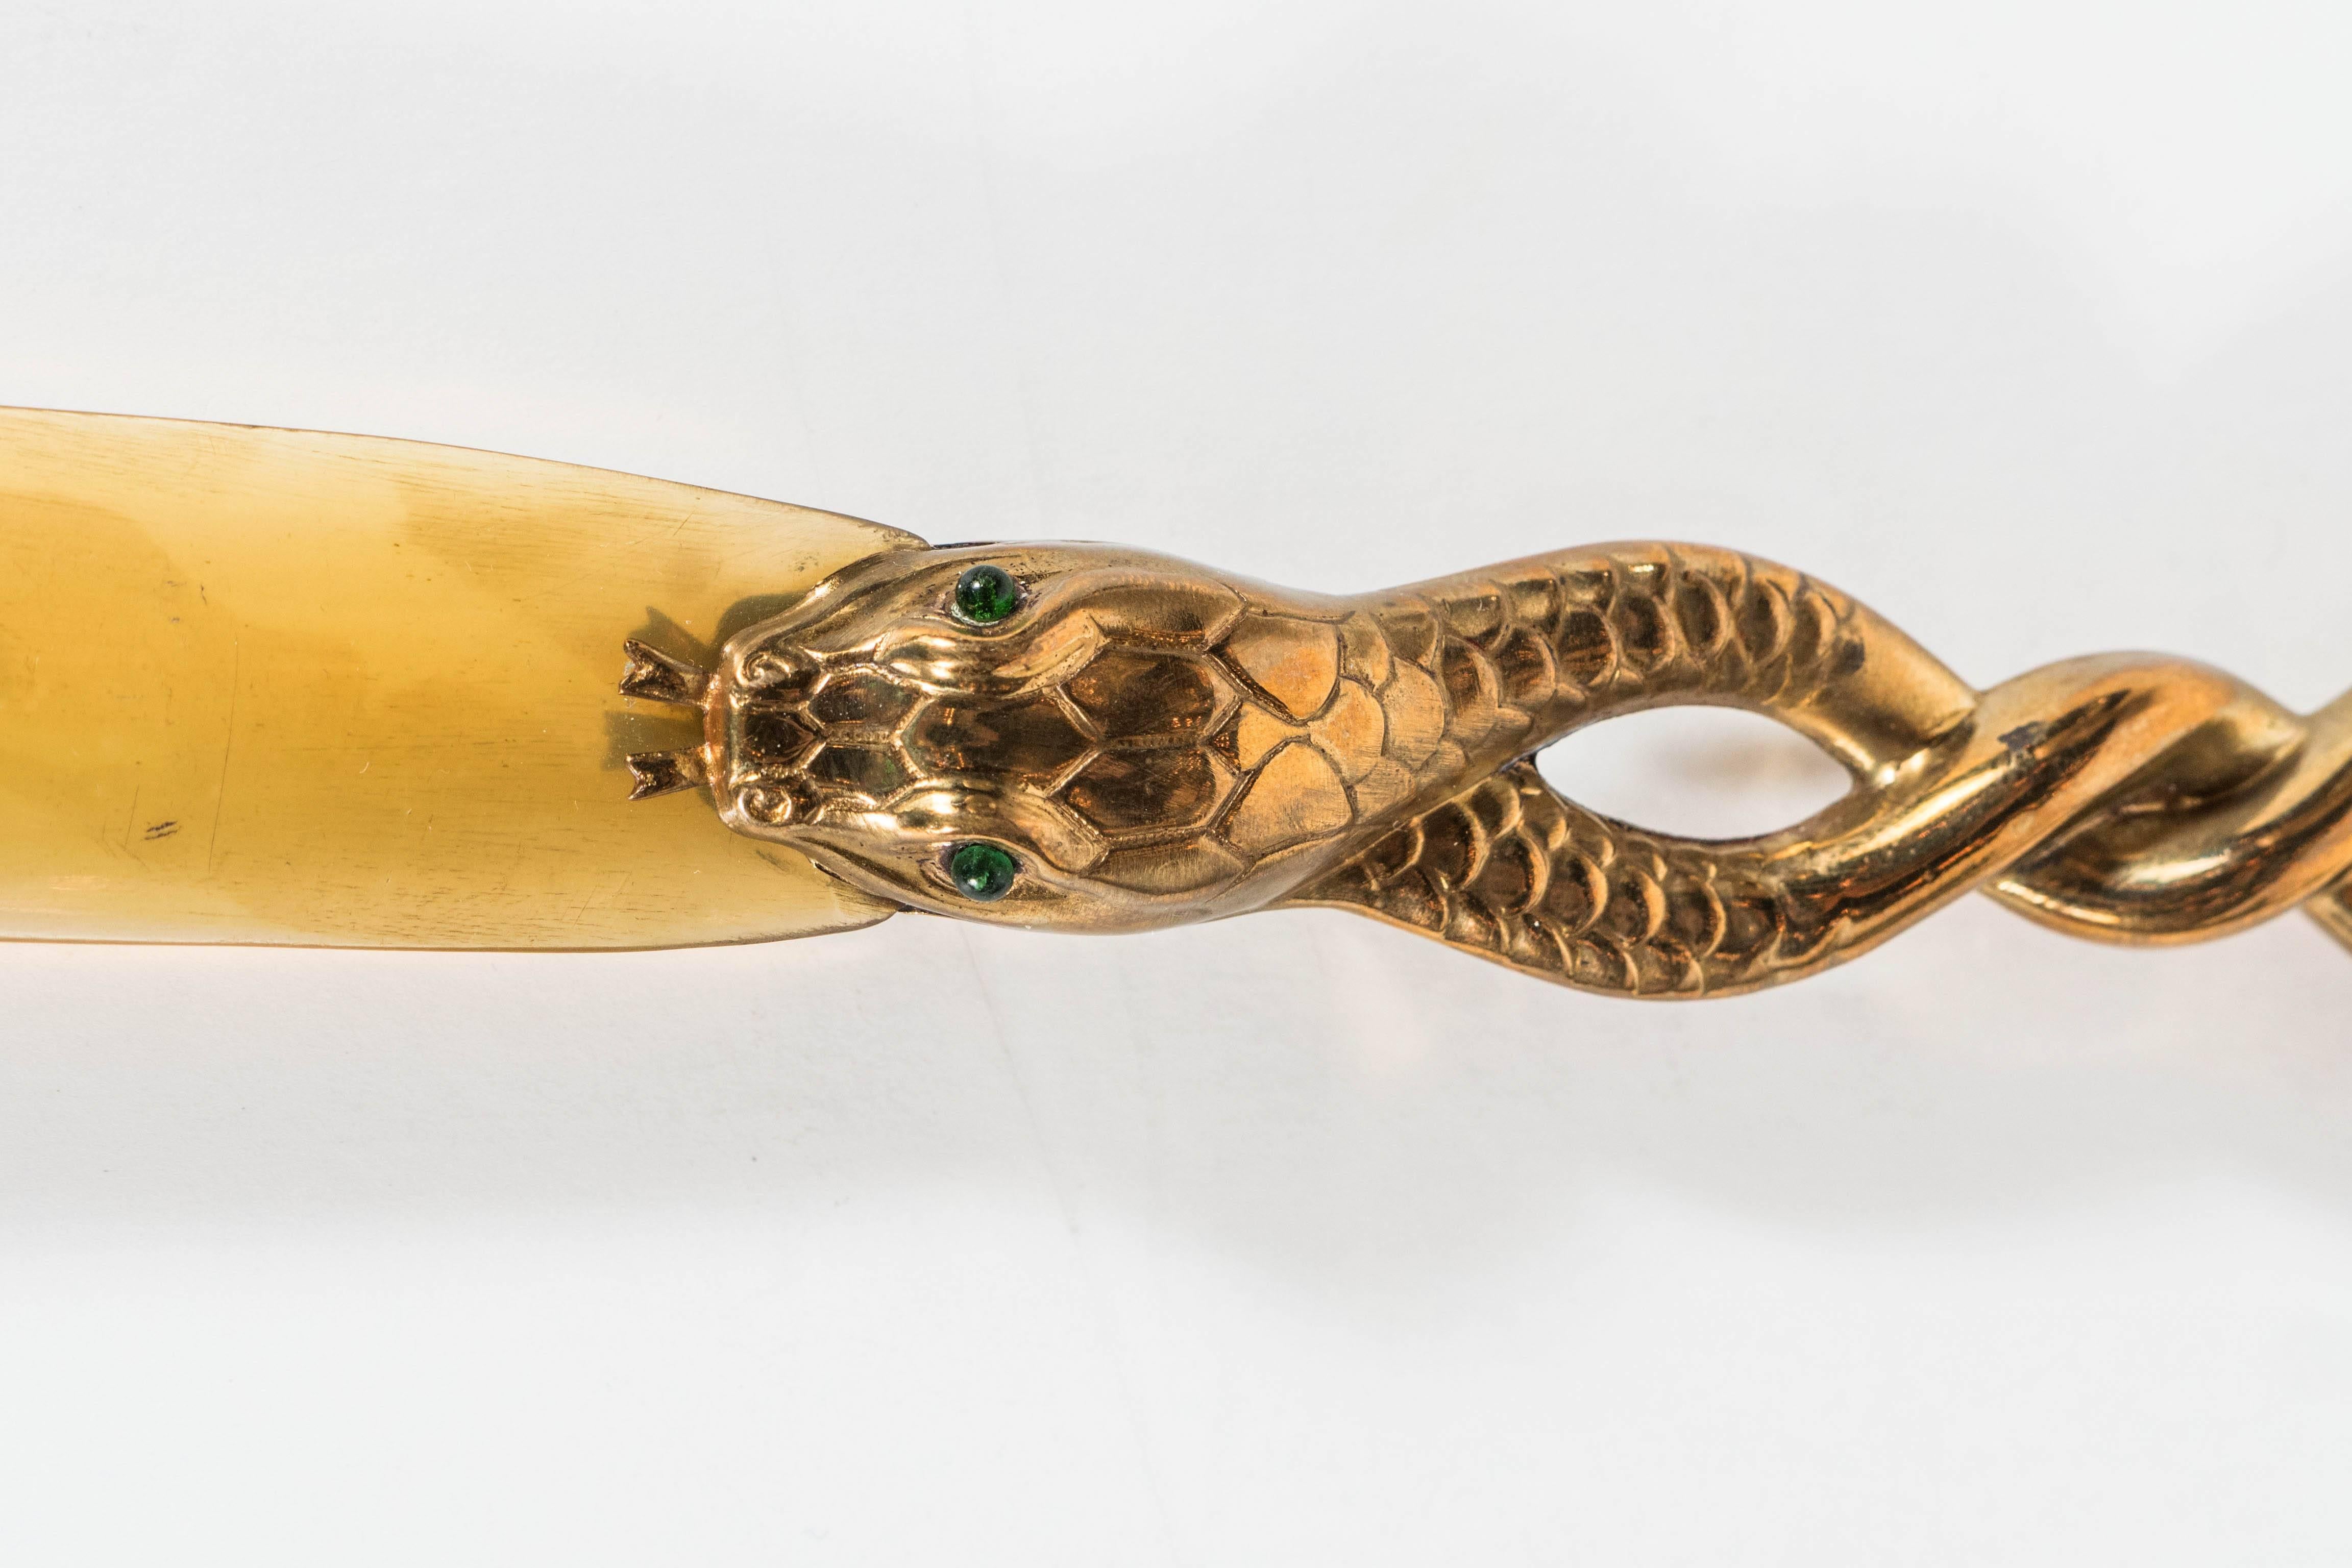 High Victorian Exquisite Antique Victorian Cobra Letter Opener with Emerald Eyes and Horn Blade